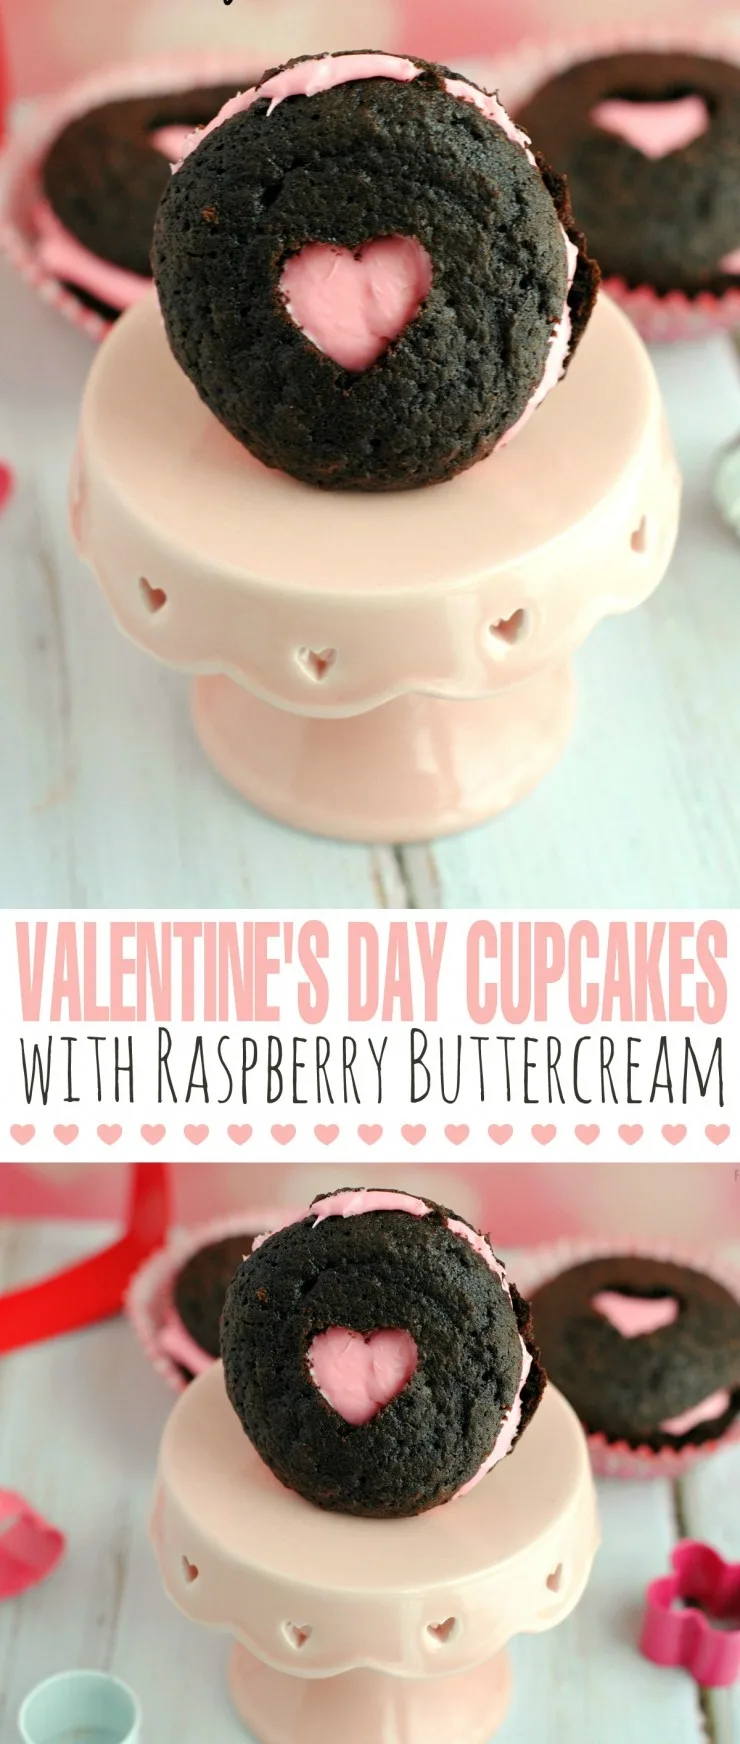 These Valentines Day Cupcakes with Raspberry Buttercream are a cute and delicious Valentine's Day Dessert perfect for the young to the old.